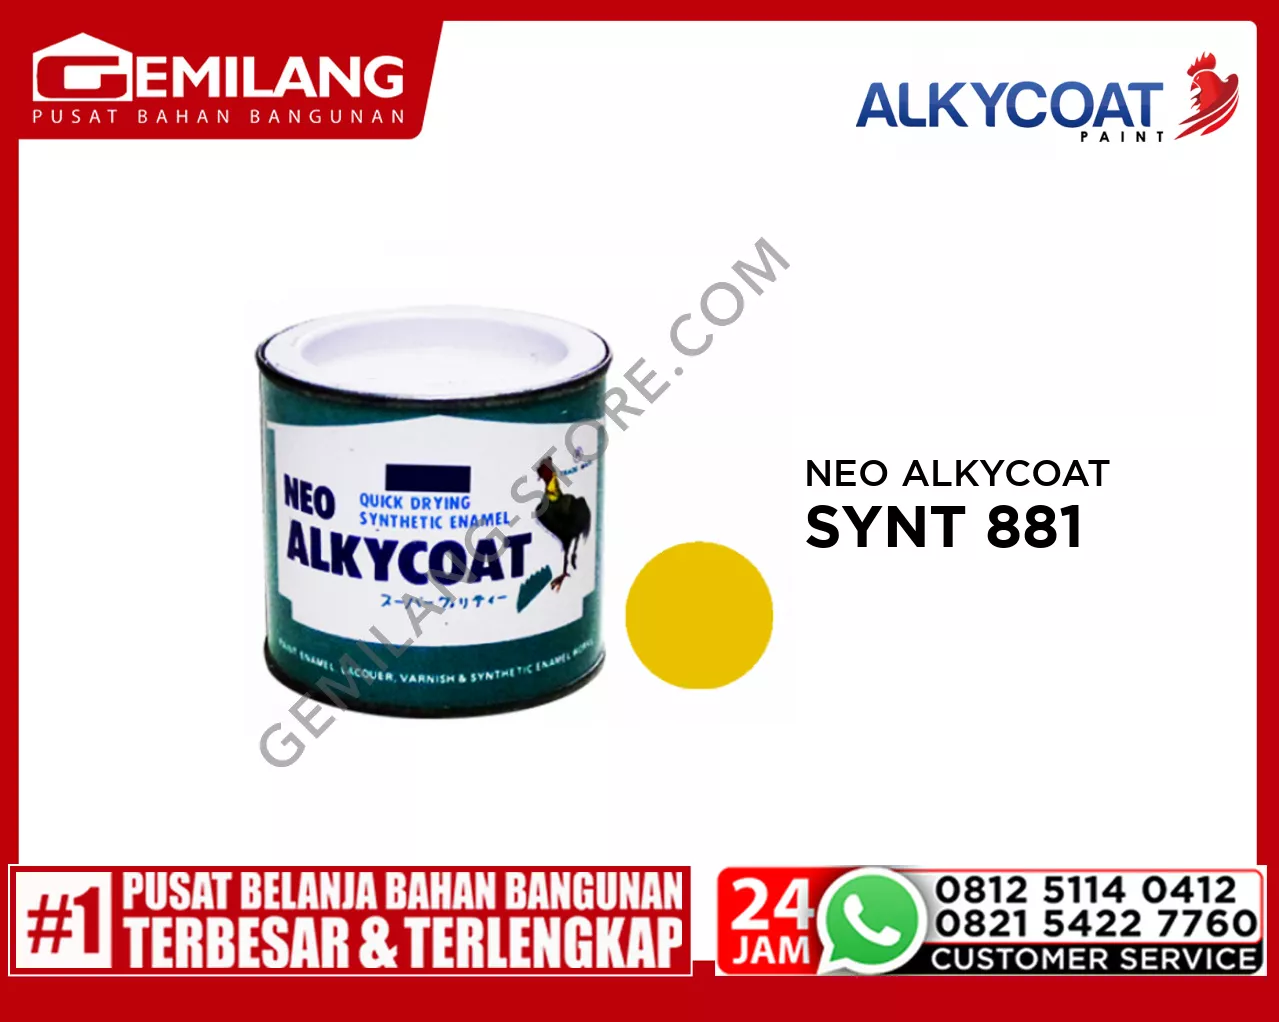 NEO ALKYCOAT SYNT 881 GOLDEN YELLOW 200cc